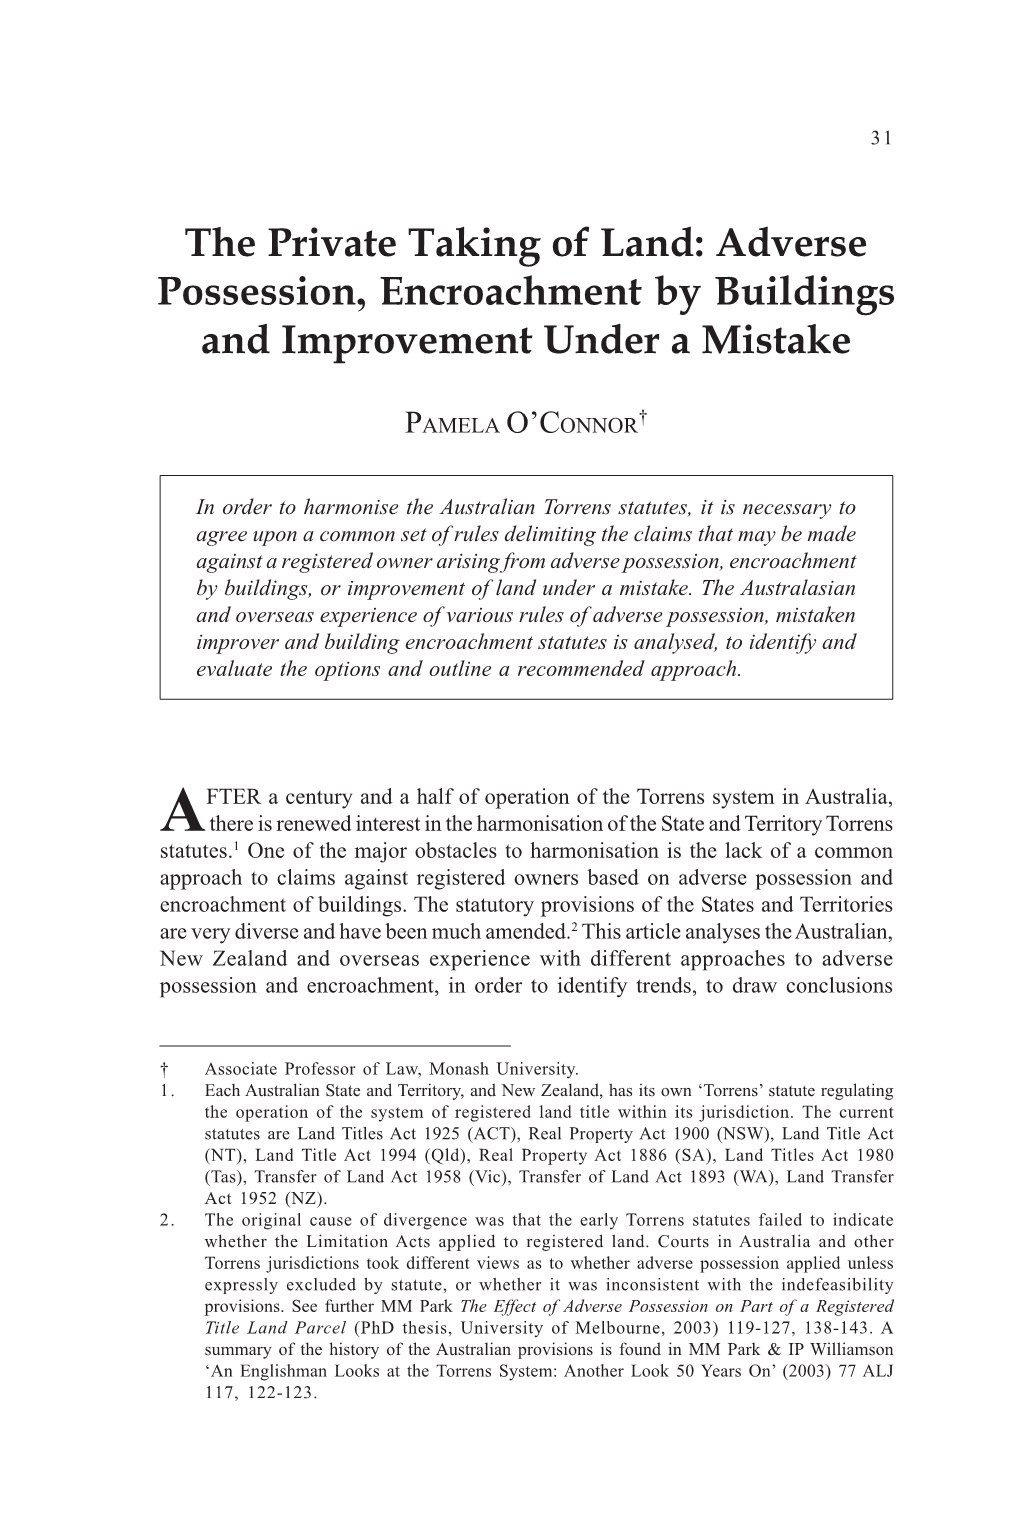 The Private Taking of Land: Adverse Possession, Encroachment by Buildings and Improvement Under a Mistake